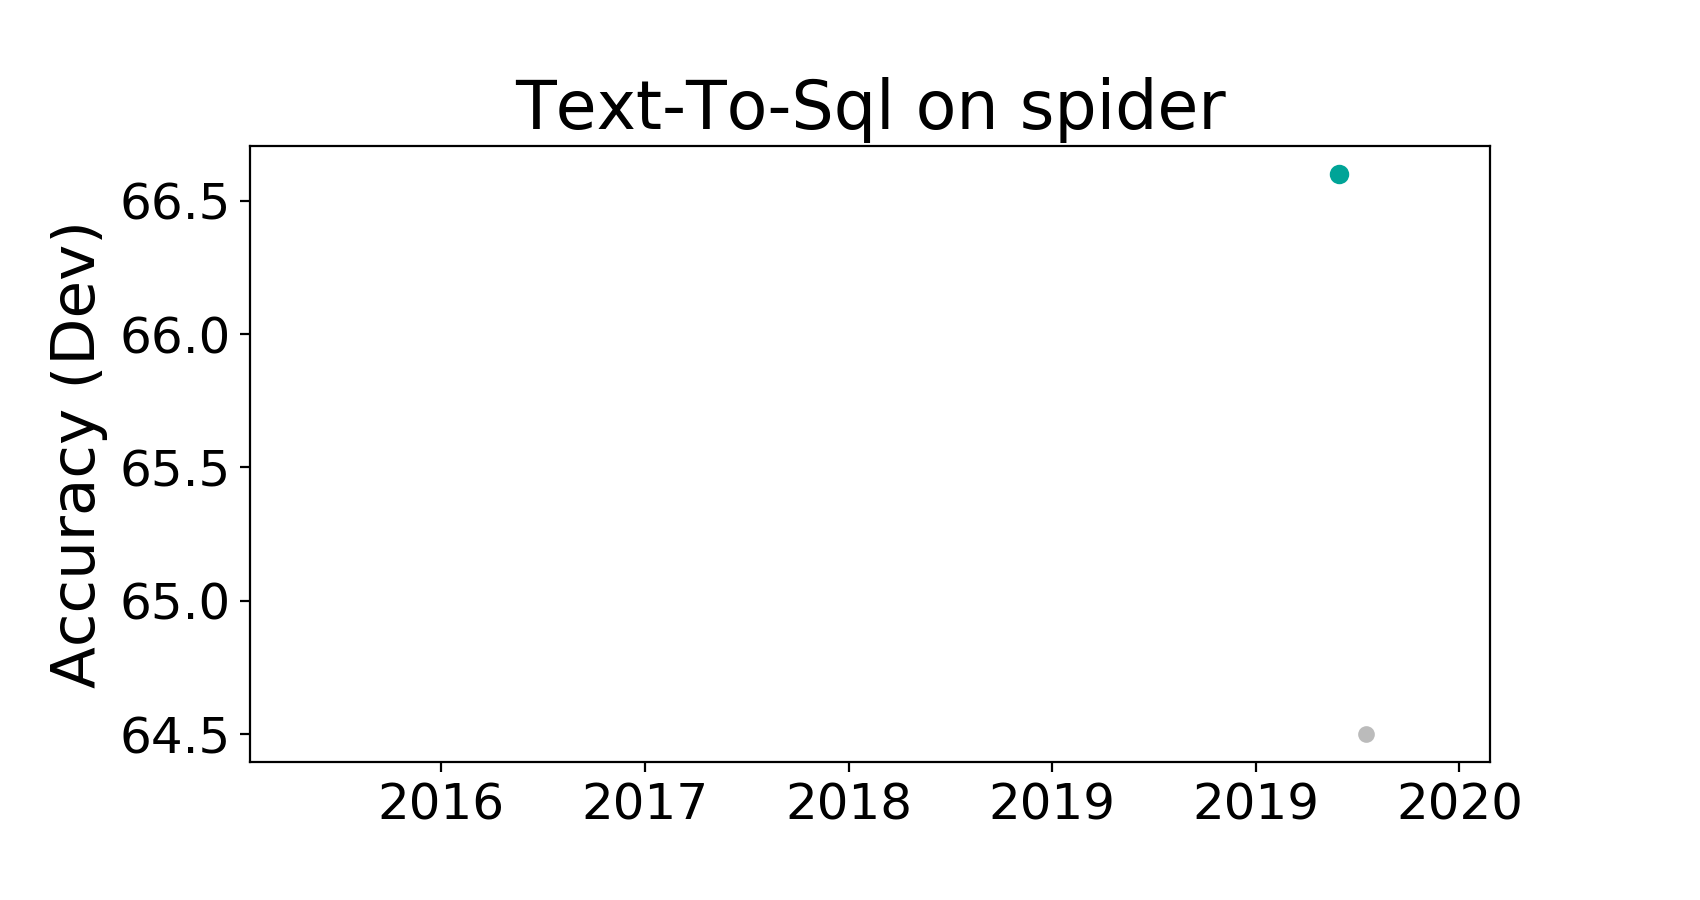 Papers with Code - spider Benchmark (Text-To-Sql)